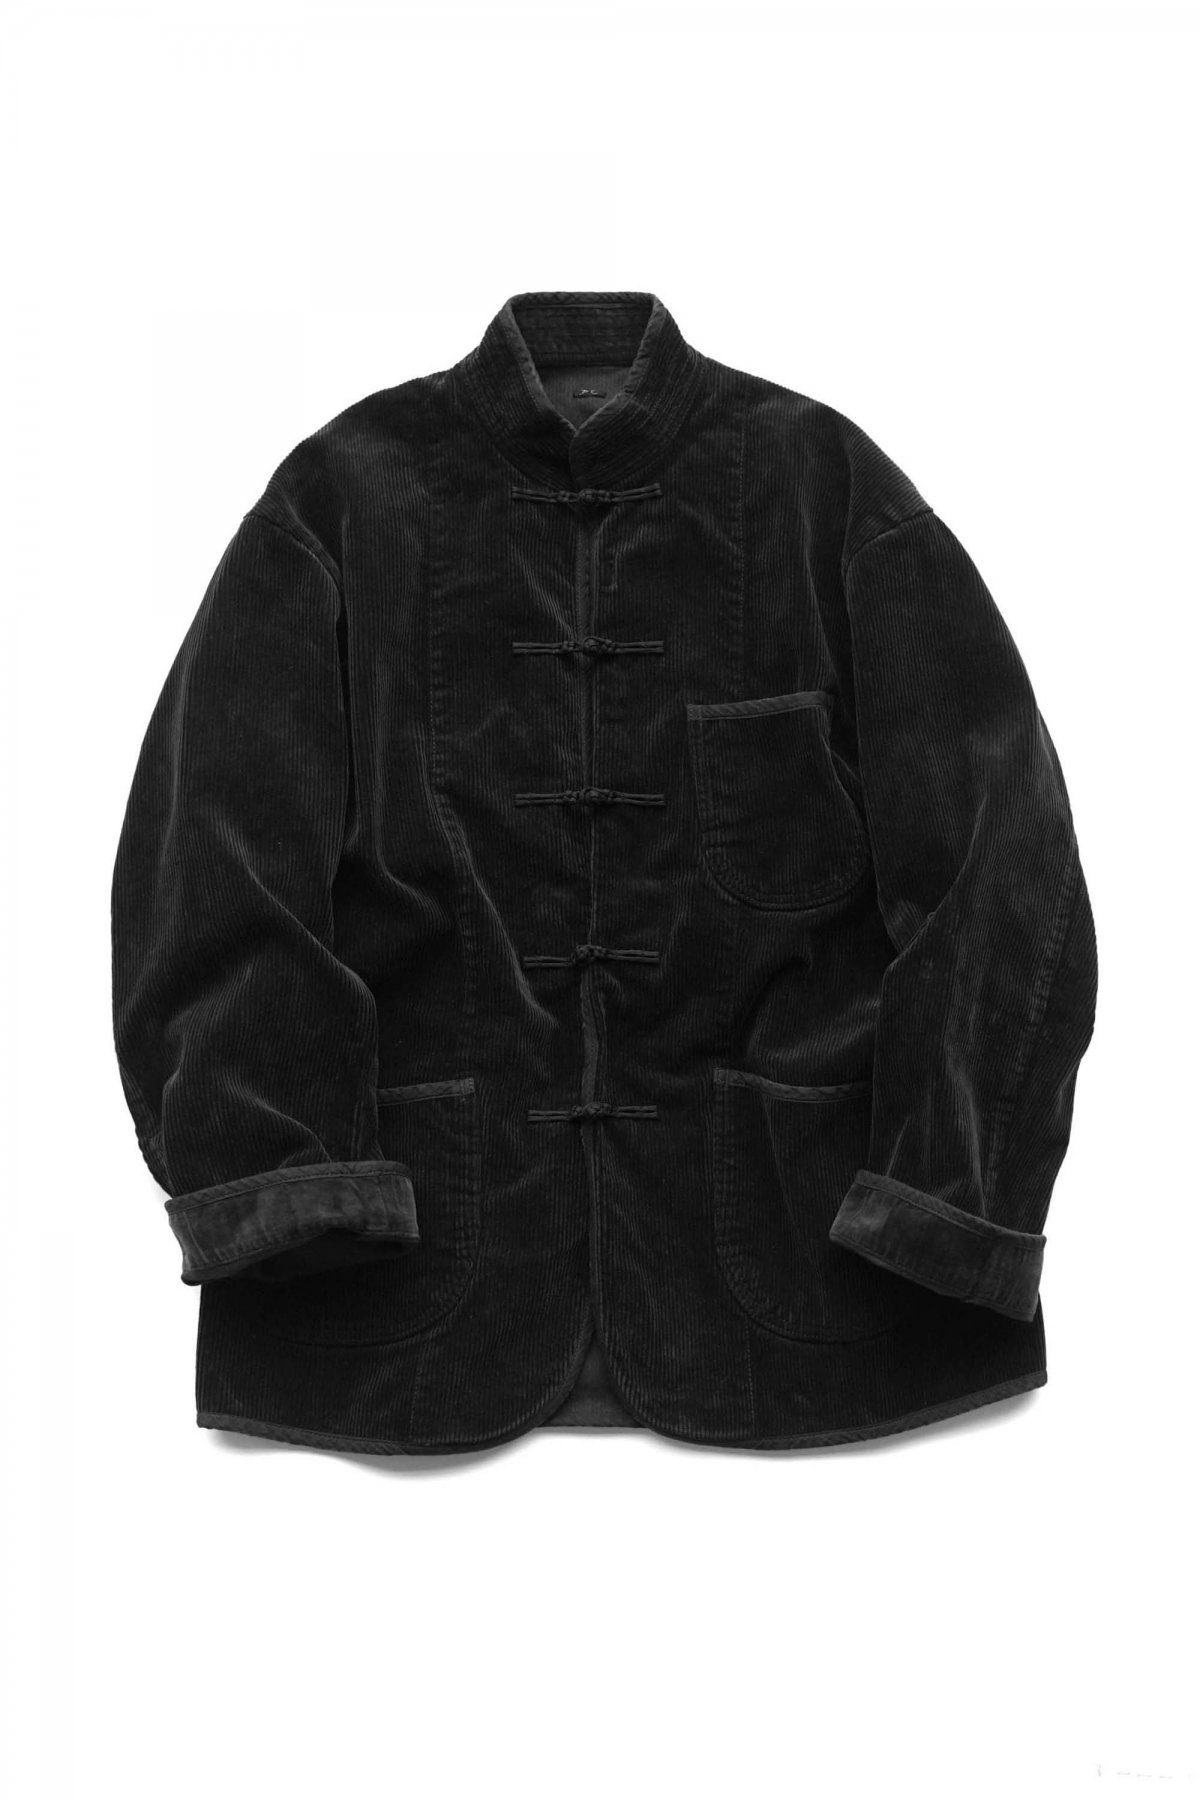 Porter Classic - CORDUROY CHINESE JACKET - WATCH CHAIN ITEM 